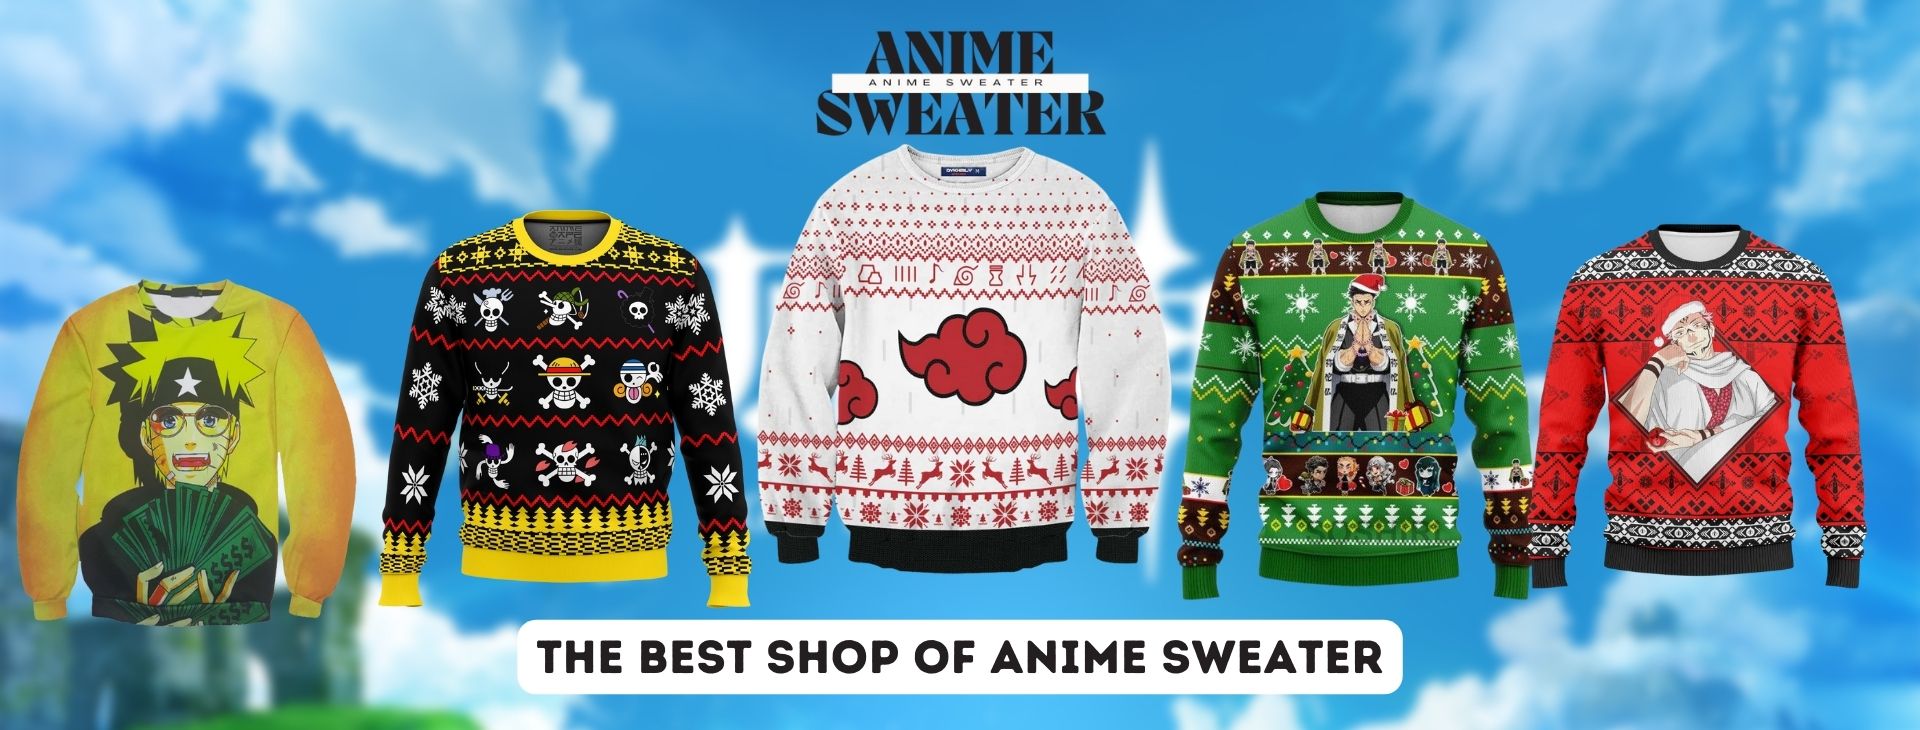 anime sweater Shop Banner 1920x730px 1 - Anime Sweater